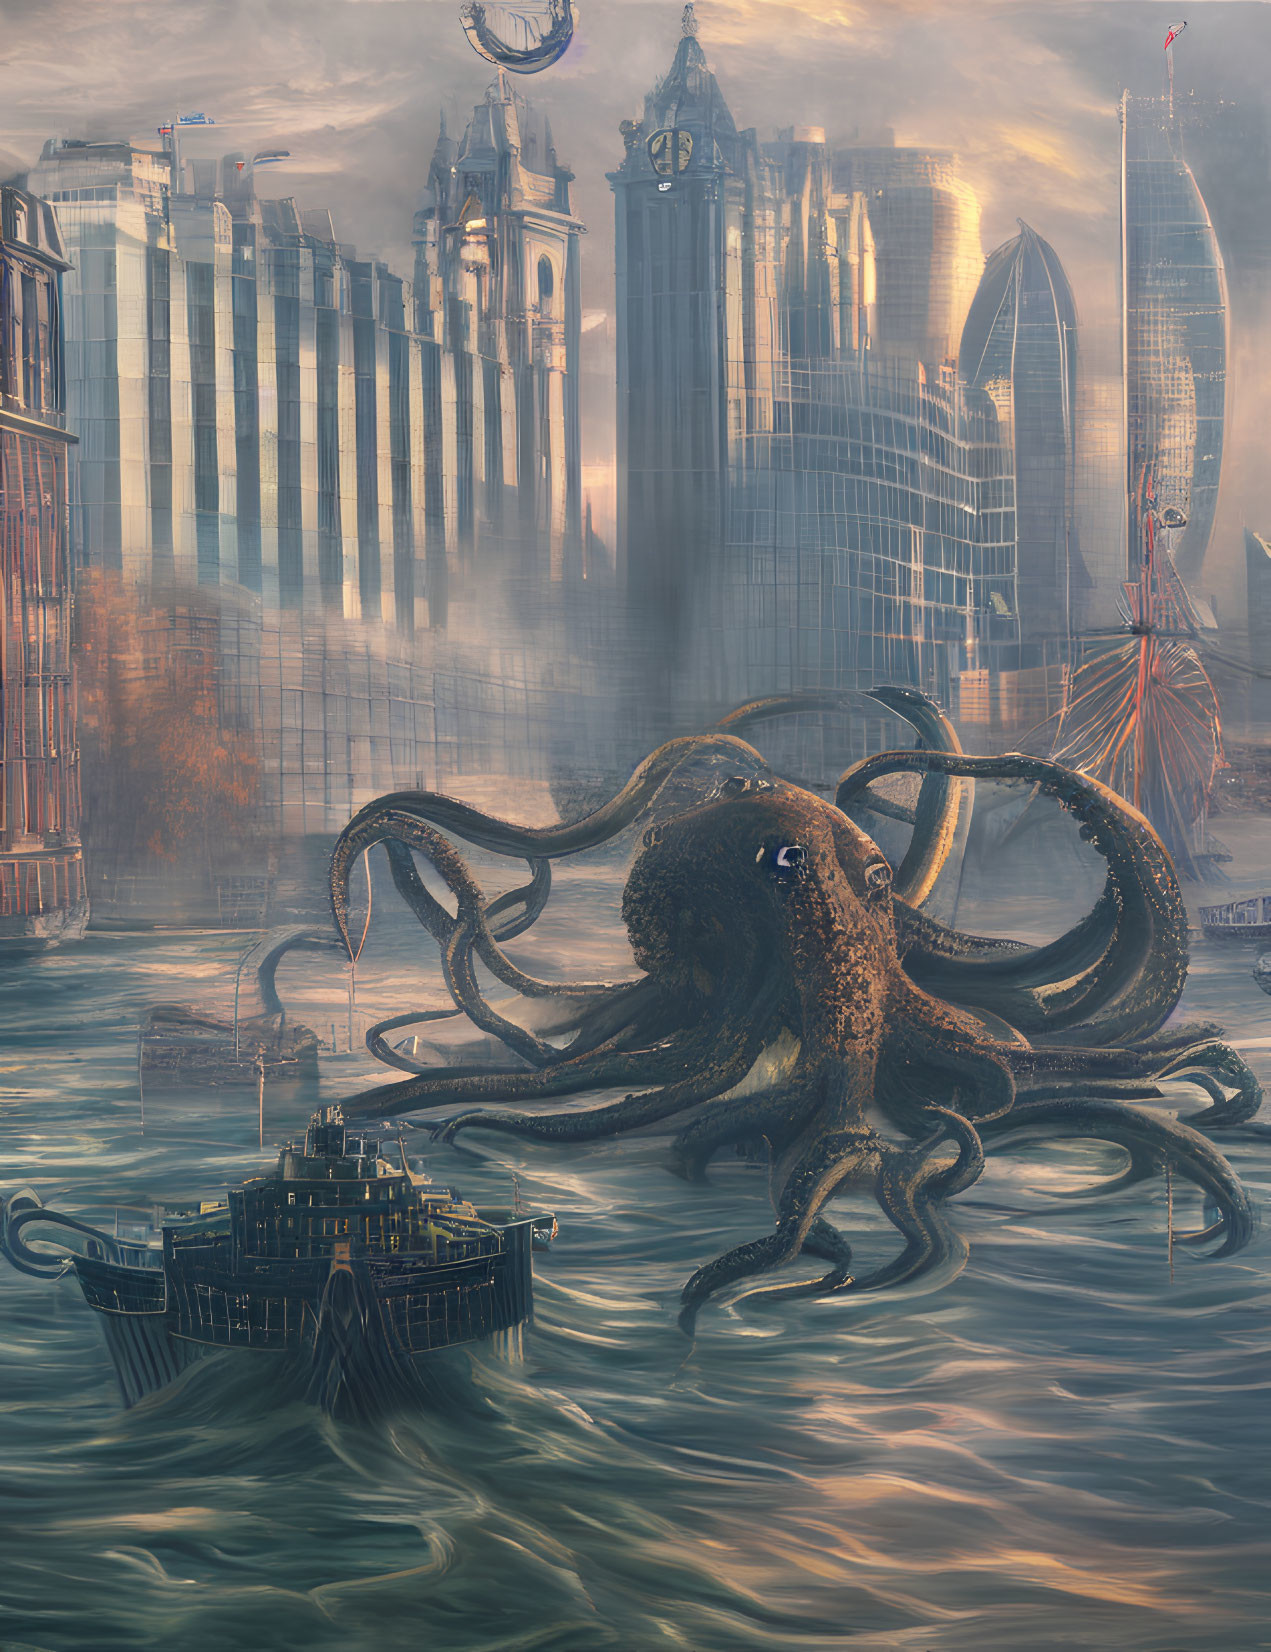 Giant octopus in front of futuristic cityscape and tall buildings under orange sky